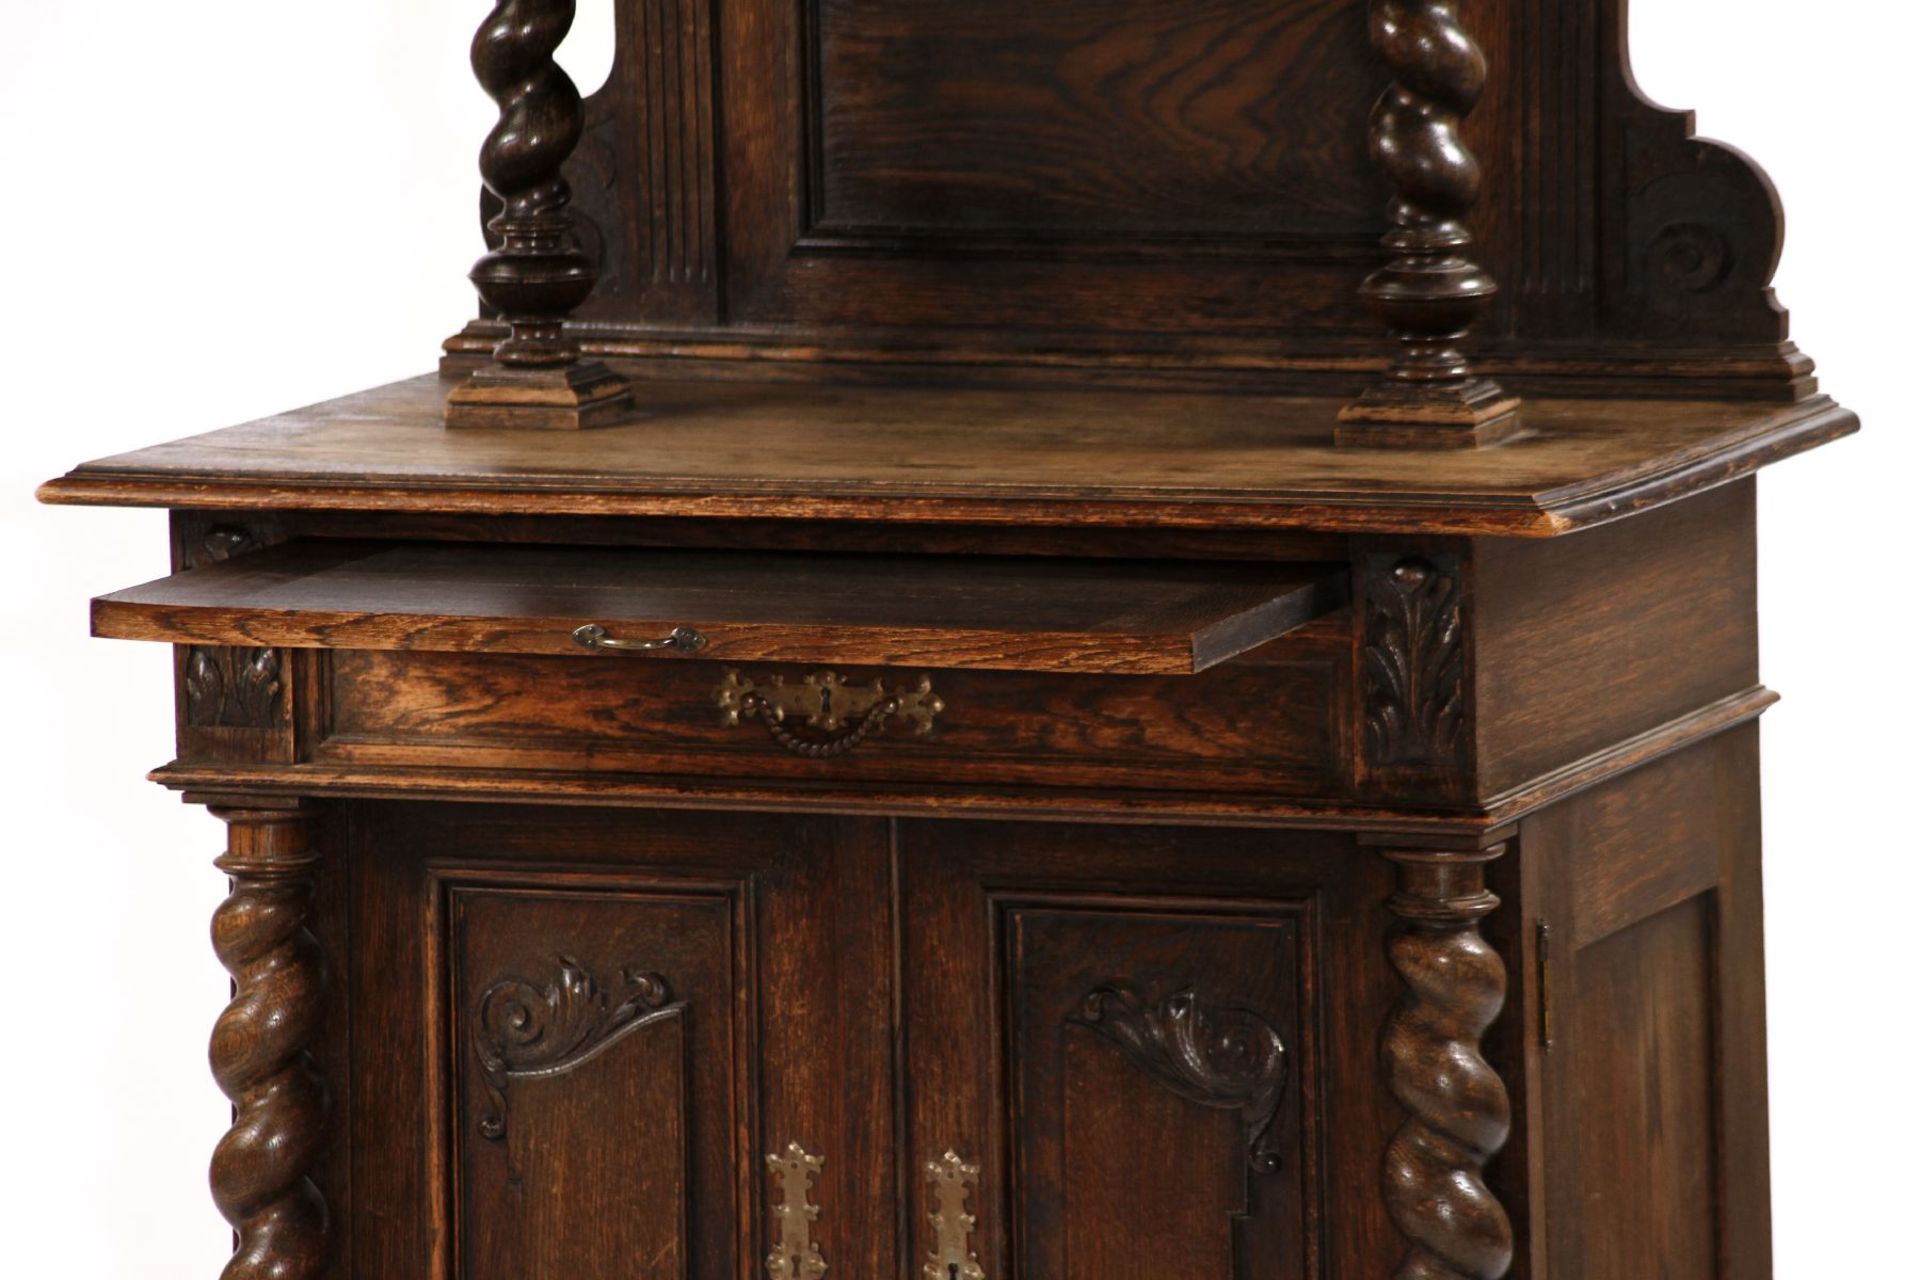 Kredenz, German, around 1890, so-called Wilhelminian style, solid oak and partly veneered, stained - Image 4 of 4